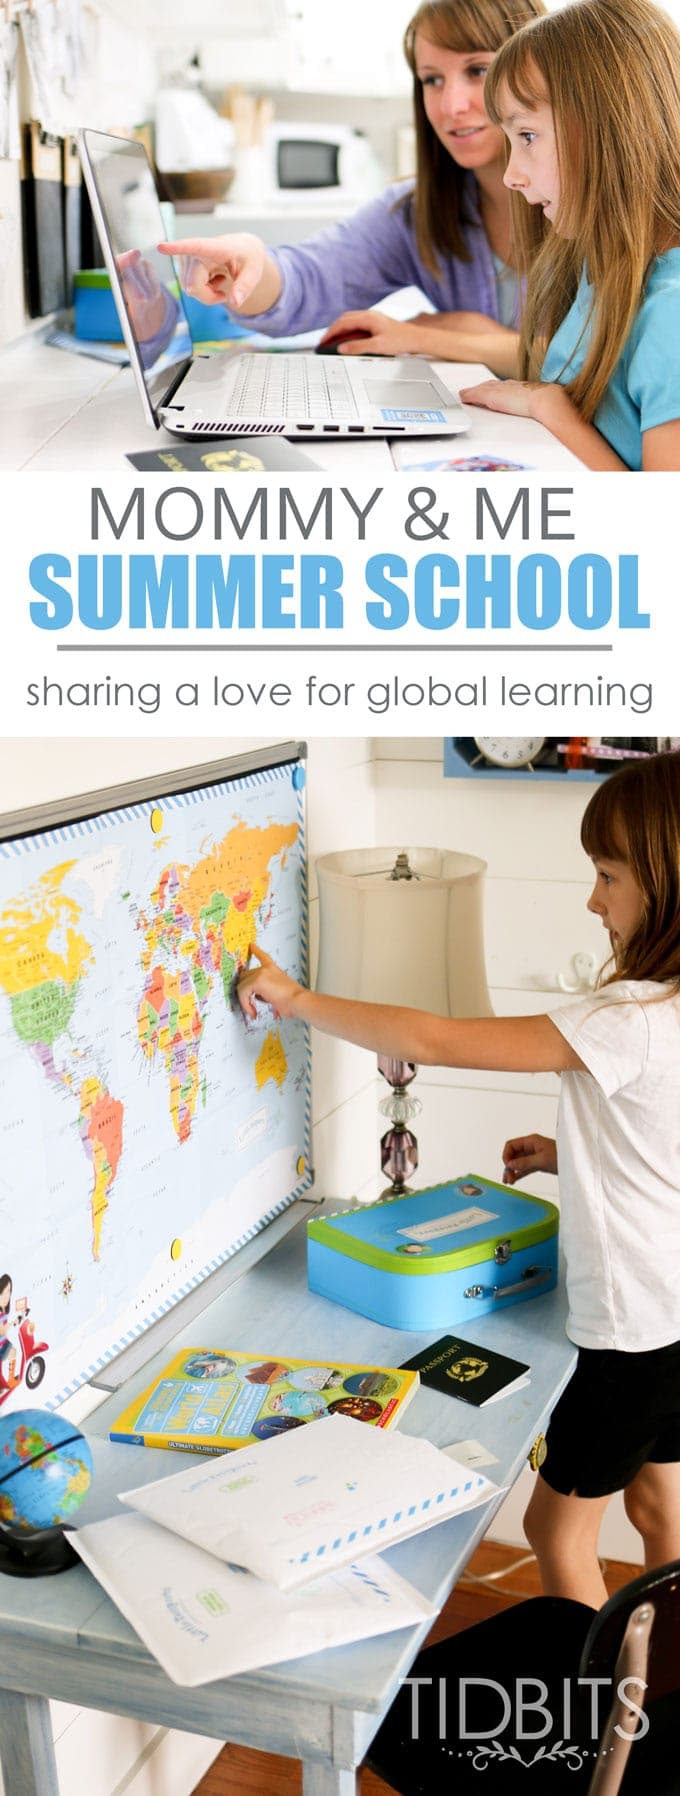 Mommy and Me Summer School - sharing a love of global learning